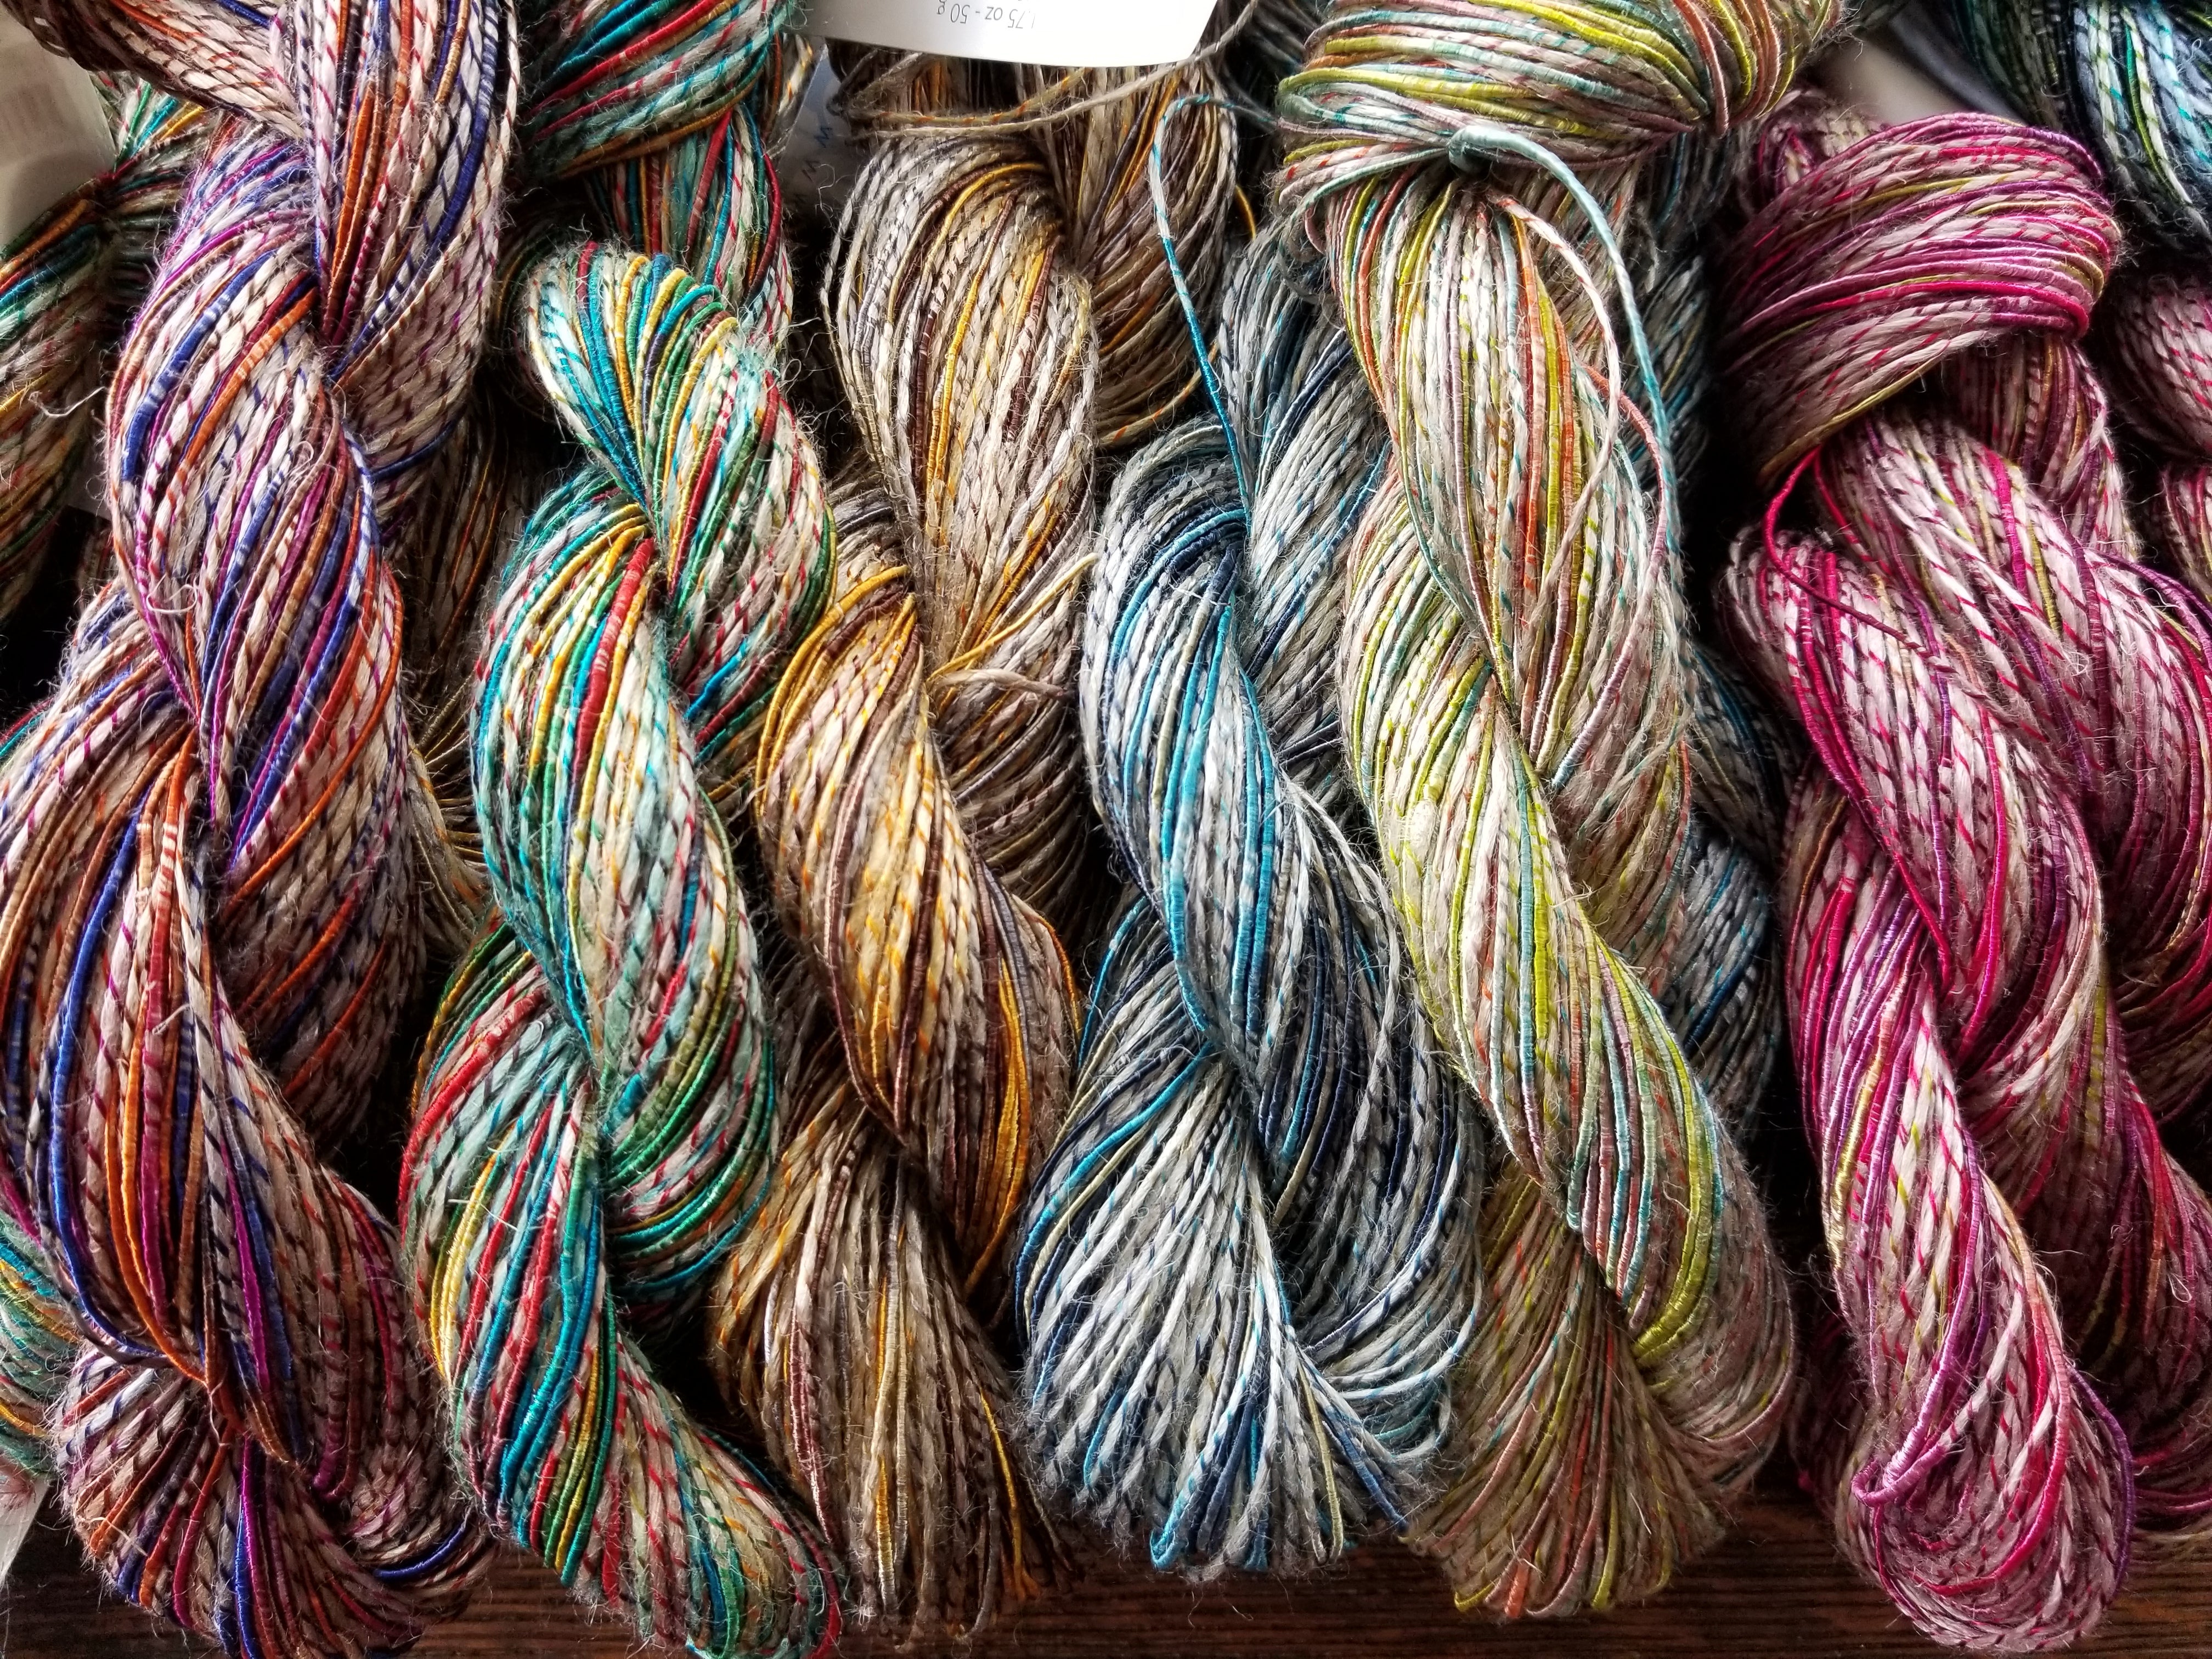 Roving Variety Pack (8 colors) - Knitting Nation